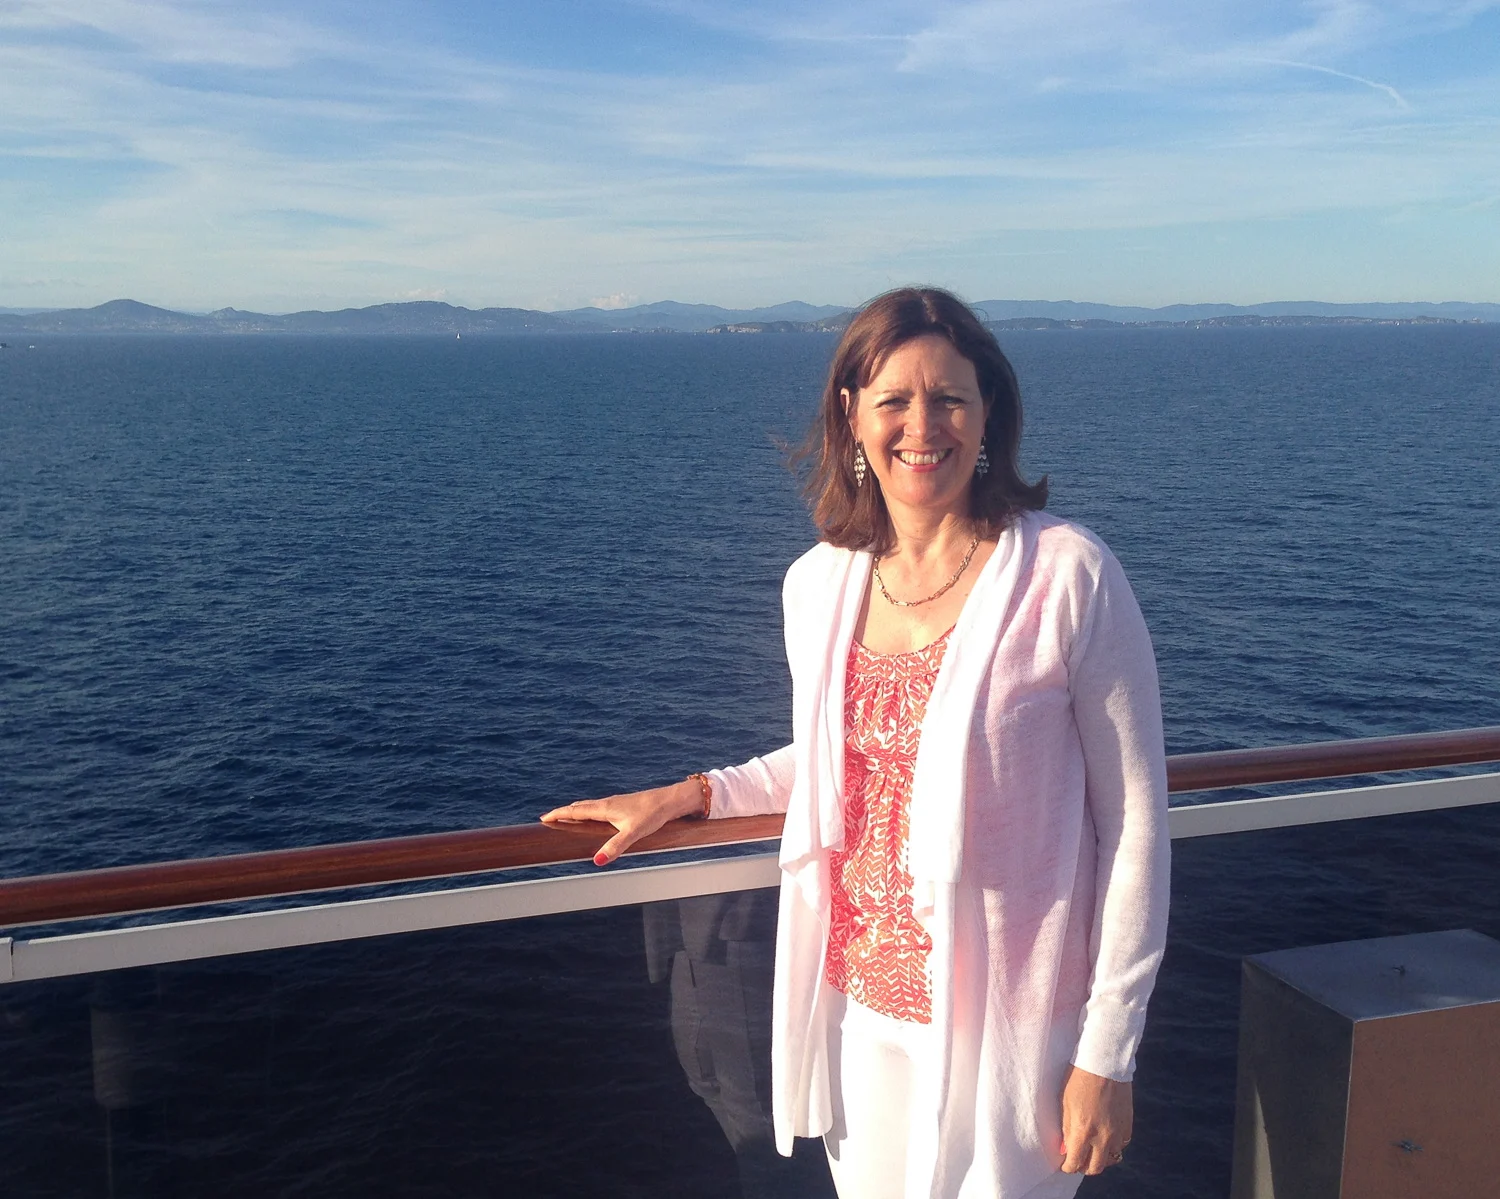 What to pack for a Mediterranean cruise - My 6 top tips